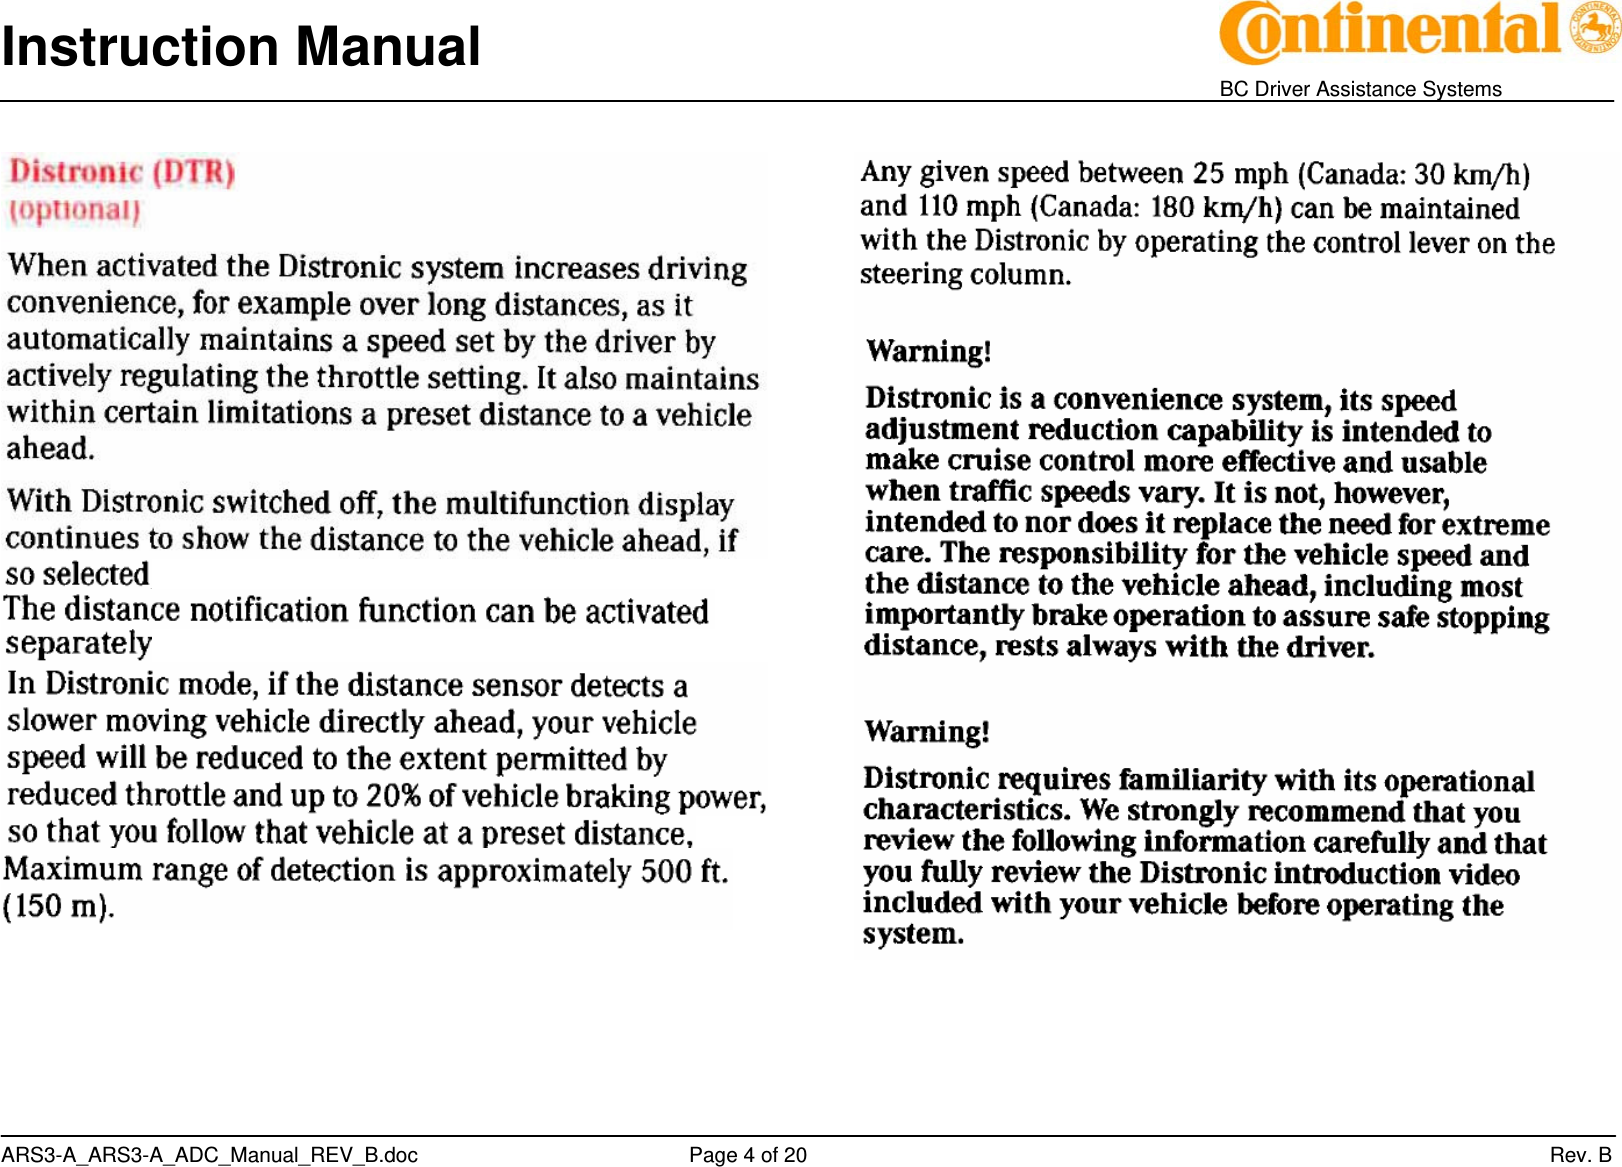 Instruction Manual    BC Driver Assistance Systems ARS3-A_ARS3-A_ADC_Manual_REV_B.doc     Page 4 of 20                 Rev. B         